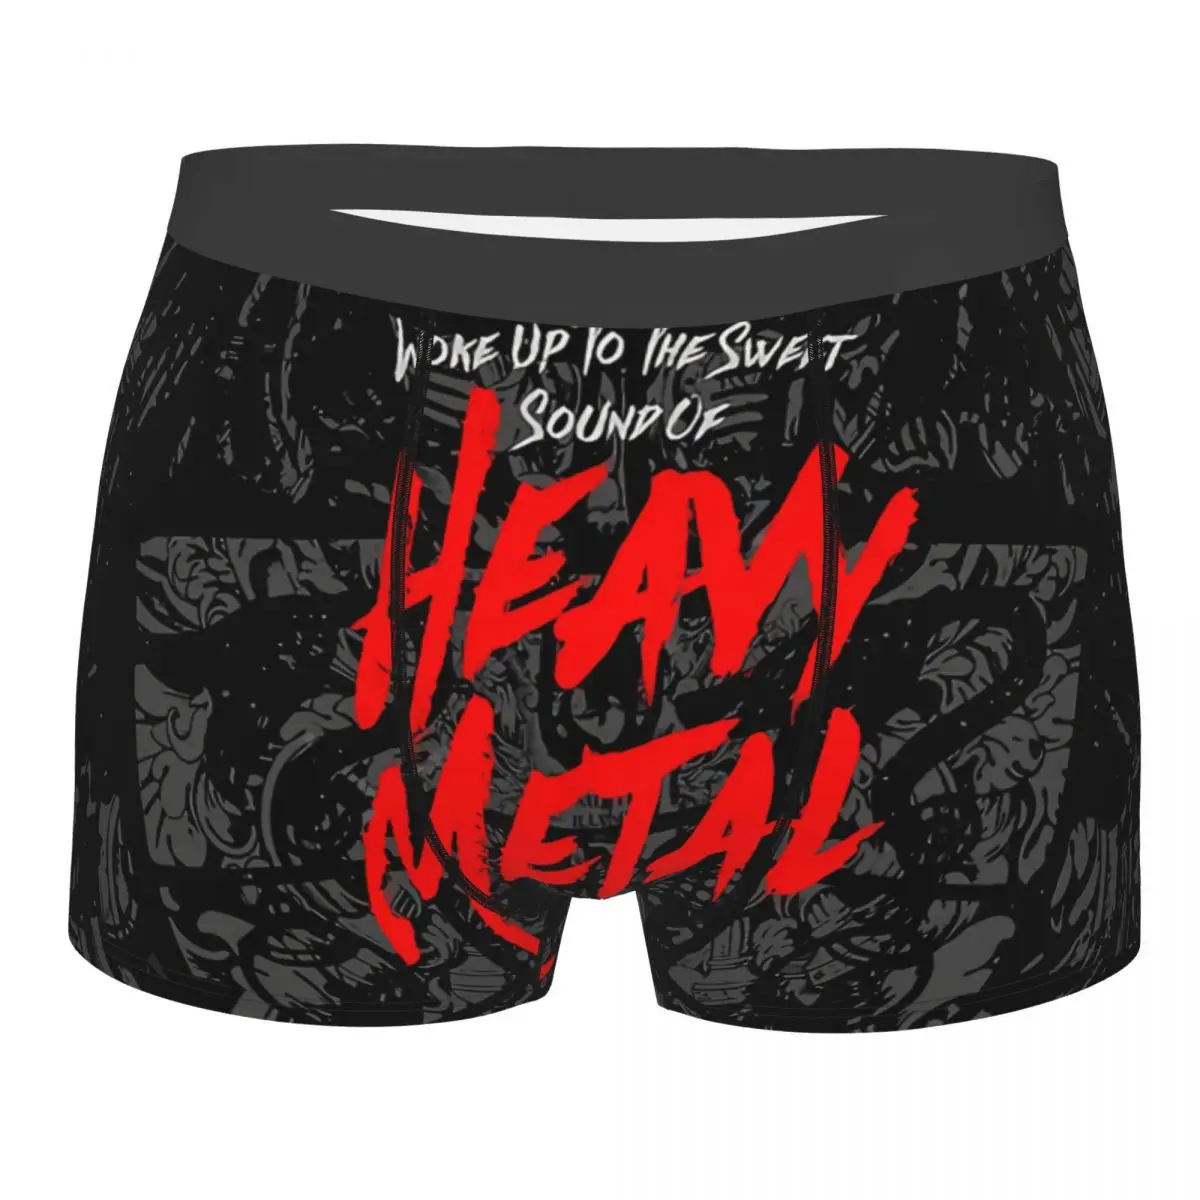 

Woke Up To The Sweet Sound Man's Boxer Briefs Underpants HEAVY METAL Highly Breathable Top Quality Sexy Shorts Gift Idea